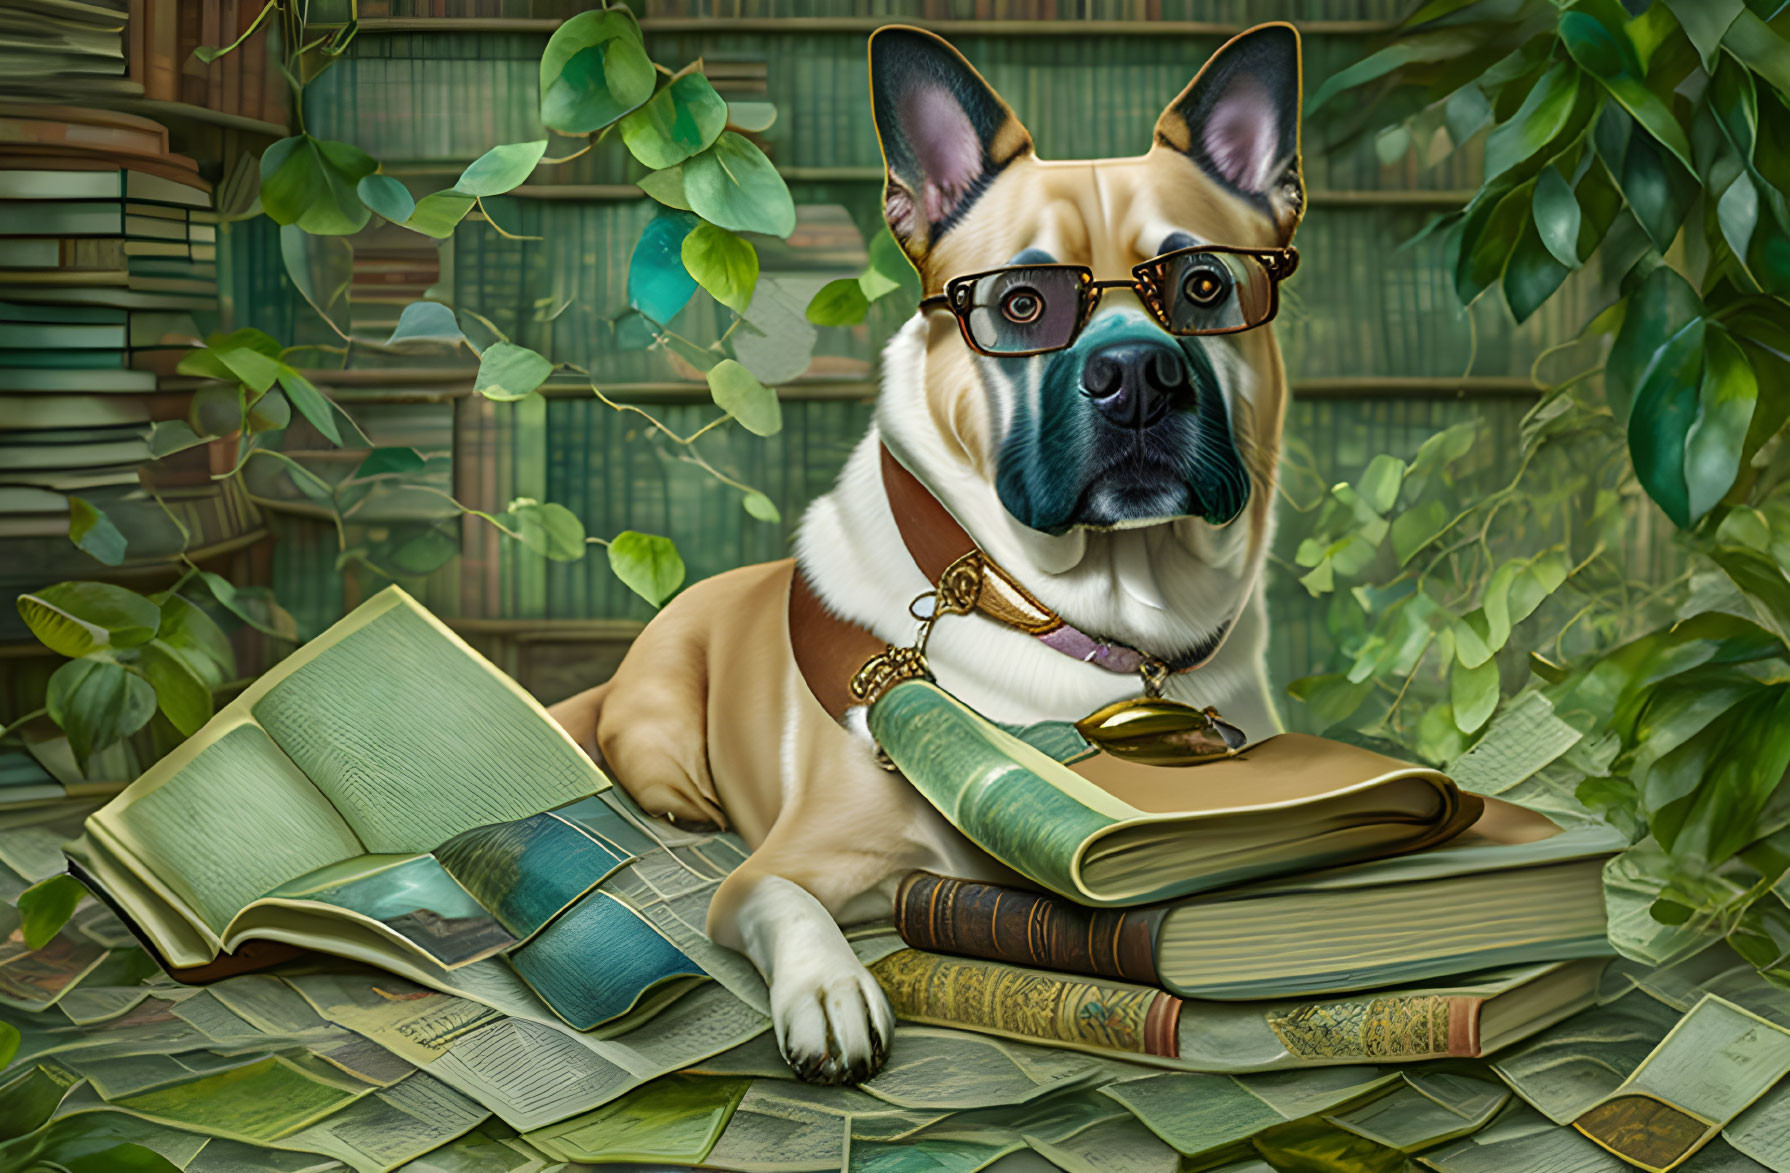 Scholarly dog amidst books and ivy in library setting